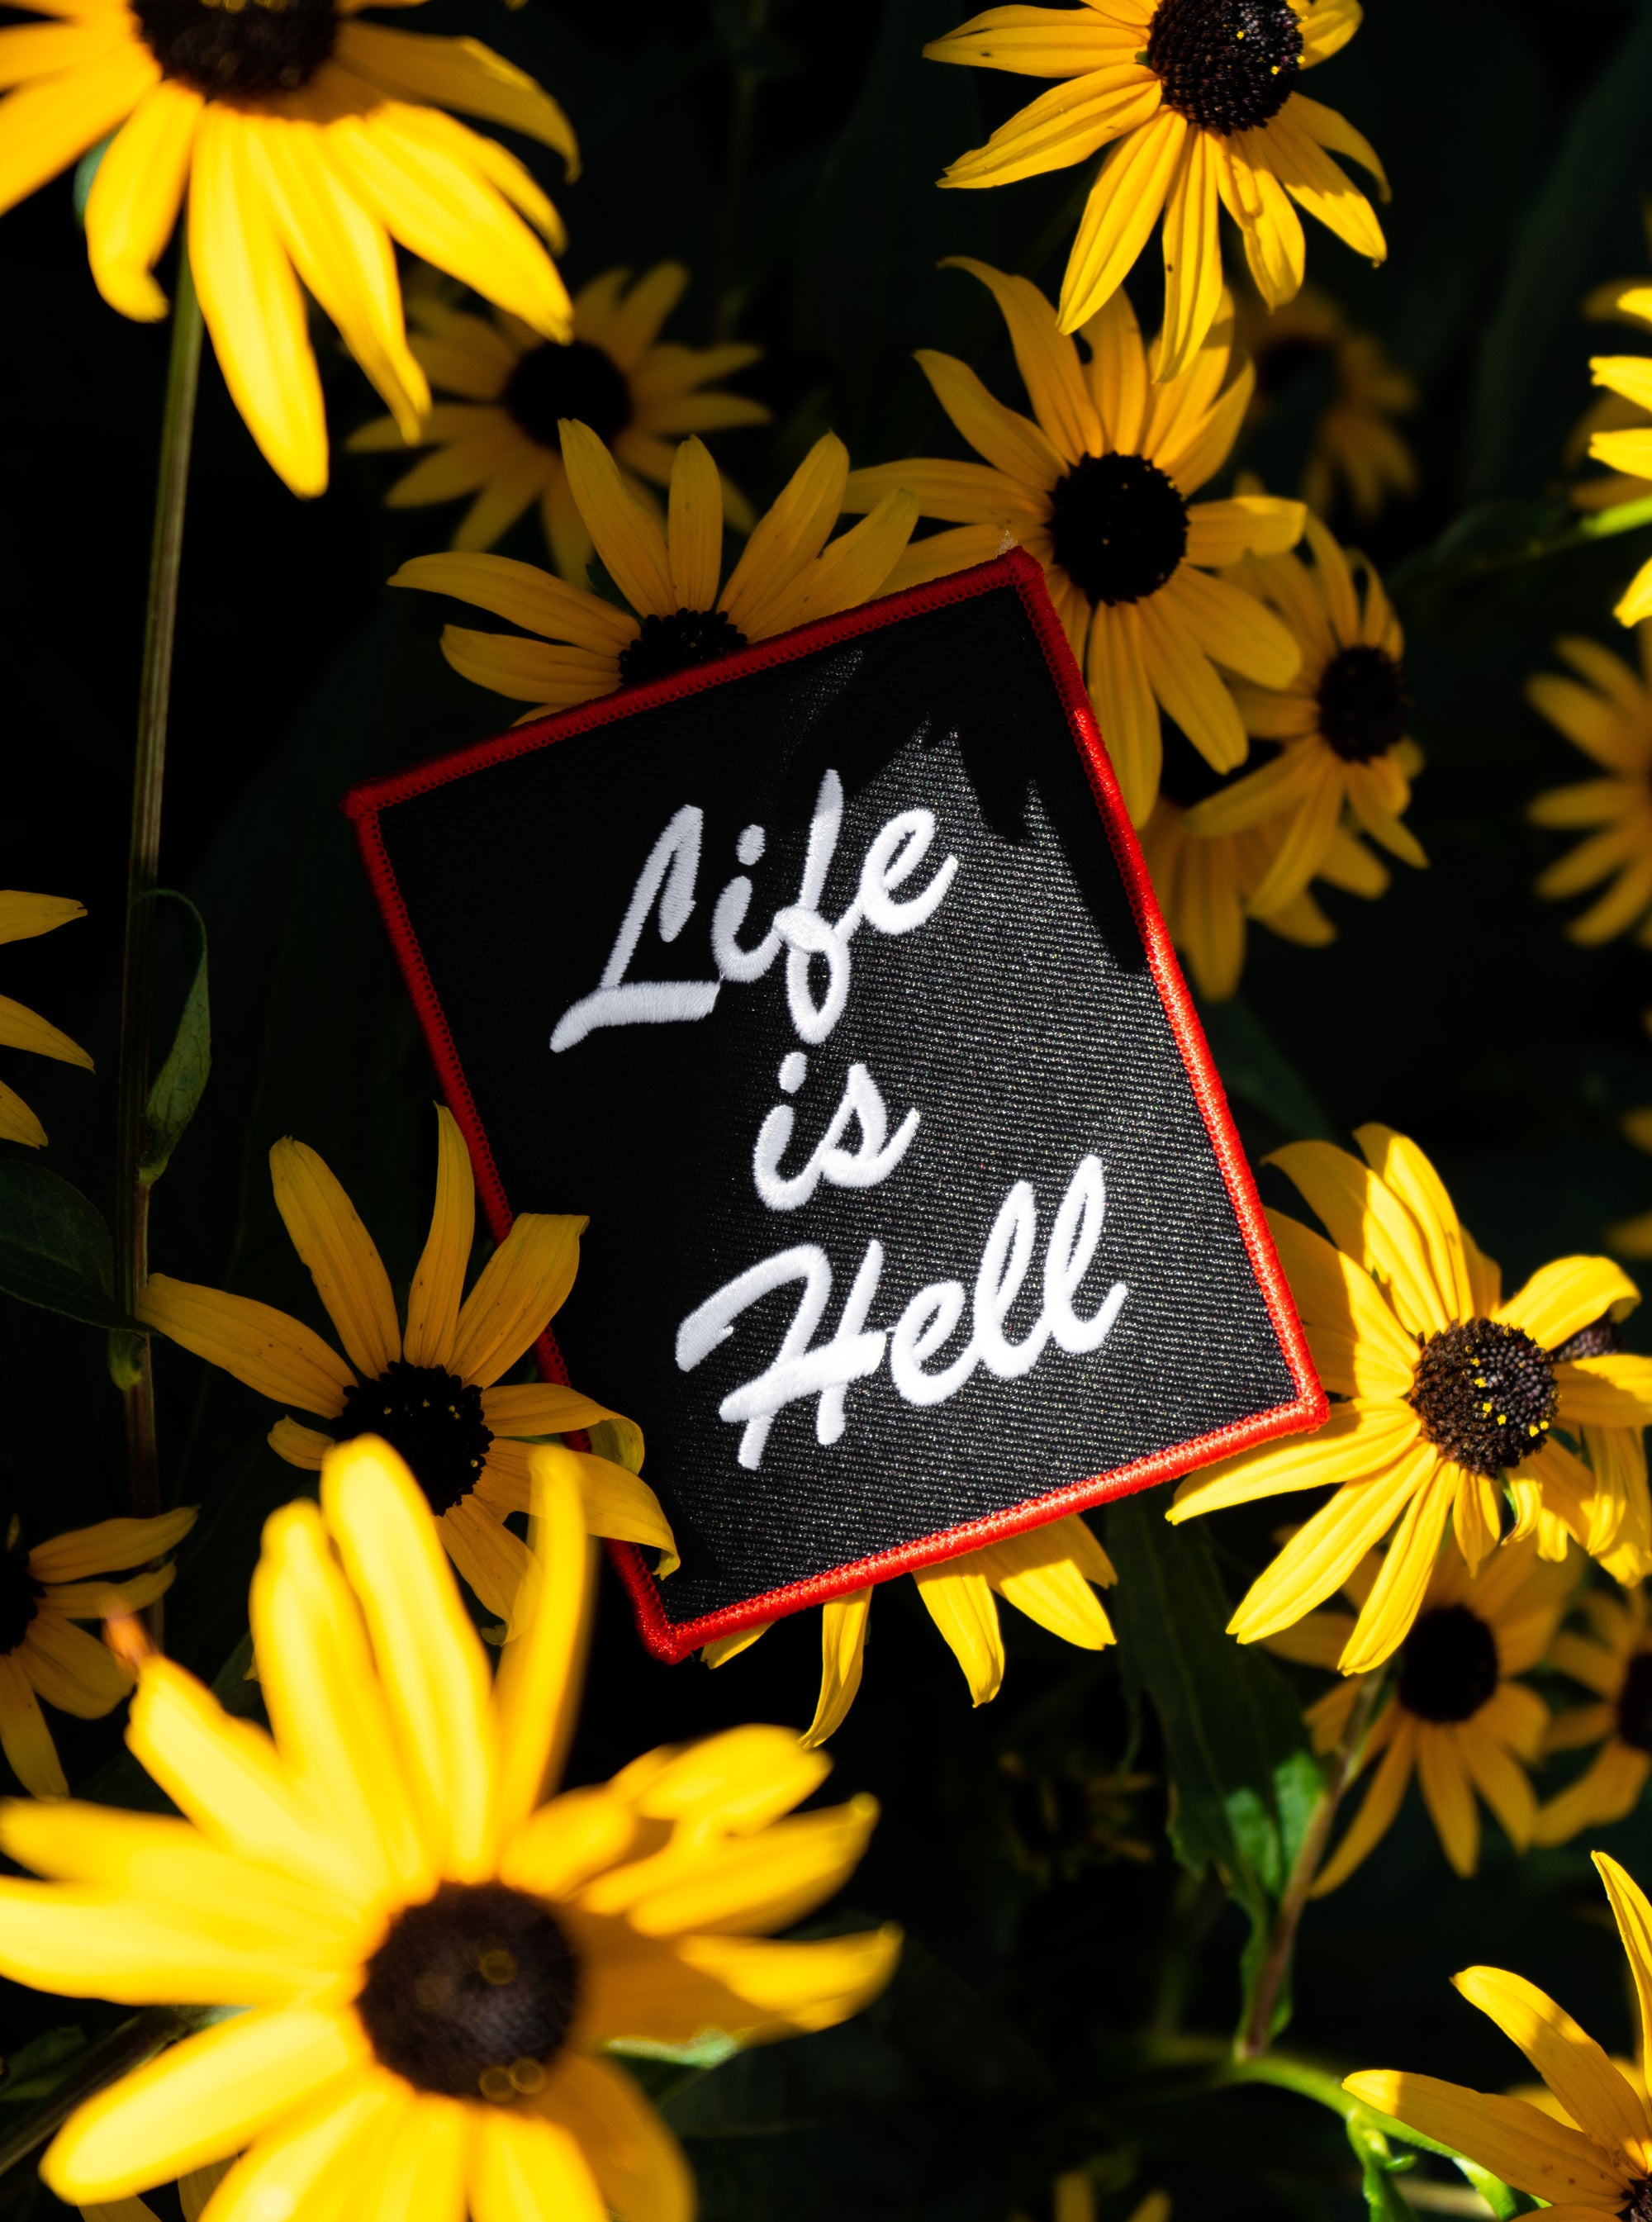 Official "NO FUN®" patch which reads "LIFE IS HELL". The patch features white, embroidered text with a red embroidered edge. Photo shows the patch in its natural habitat, nature.